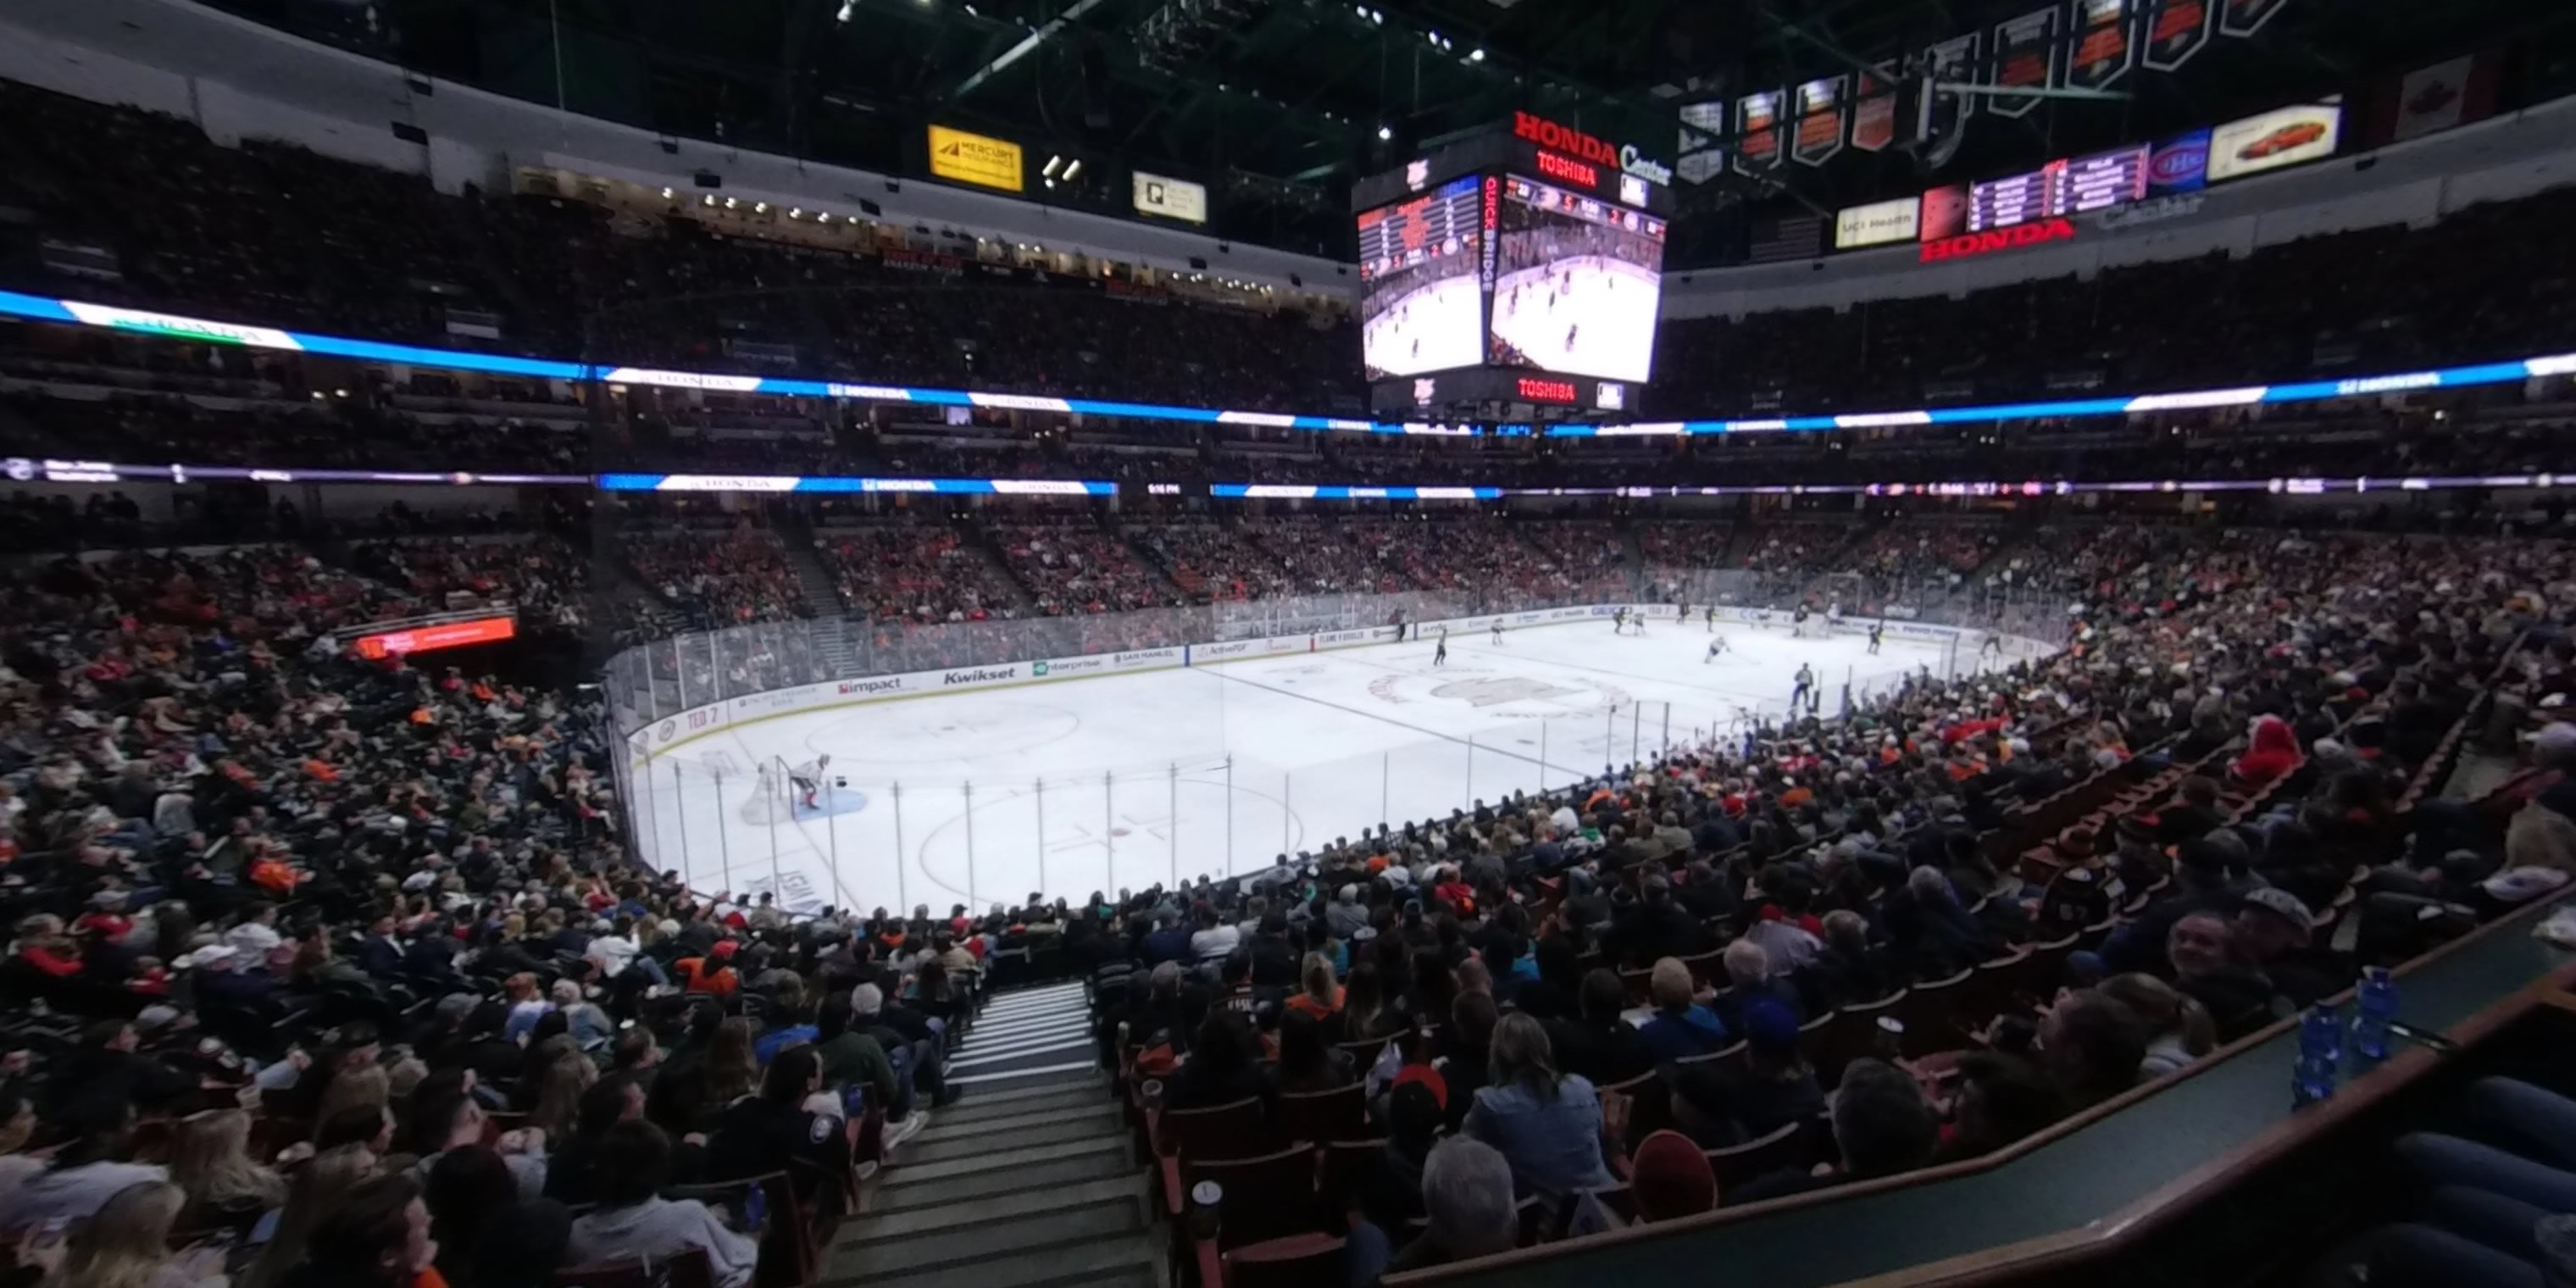 section 212 panoramic seat view  for hockey - honda center